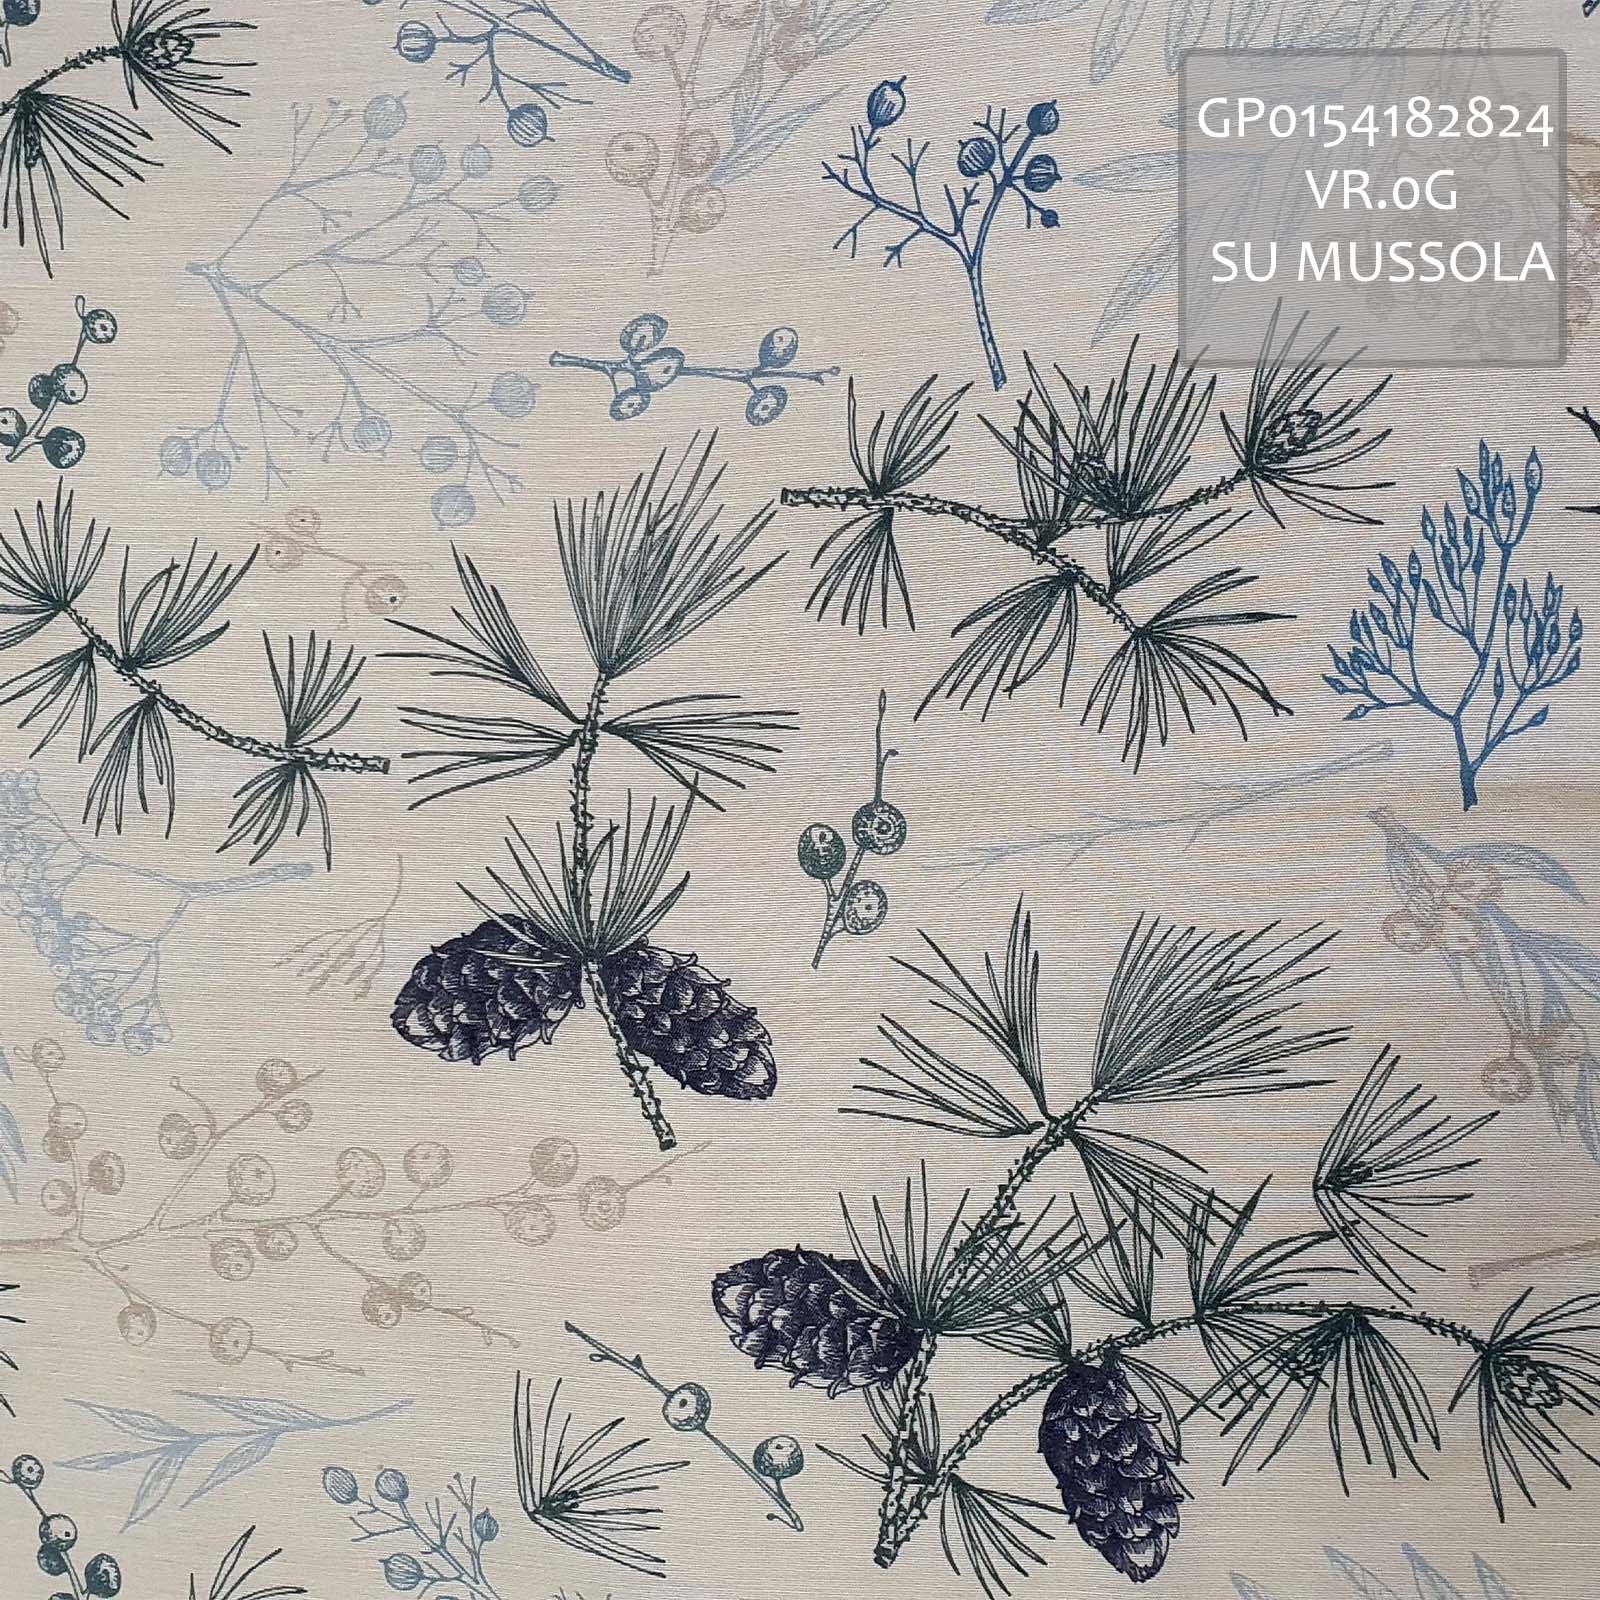 fabric print with digital pigment colourant, winter tundra style on muslin textile<br /> 100% Made in Italy fabric. Style classic with fancy and flowers decorations.

 Treatments: soft standard. Type of workings: muslin. 